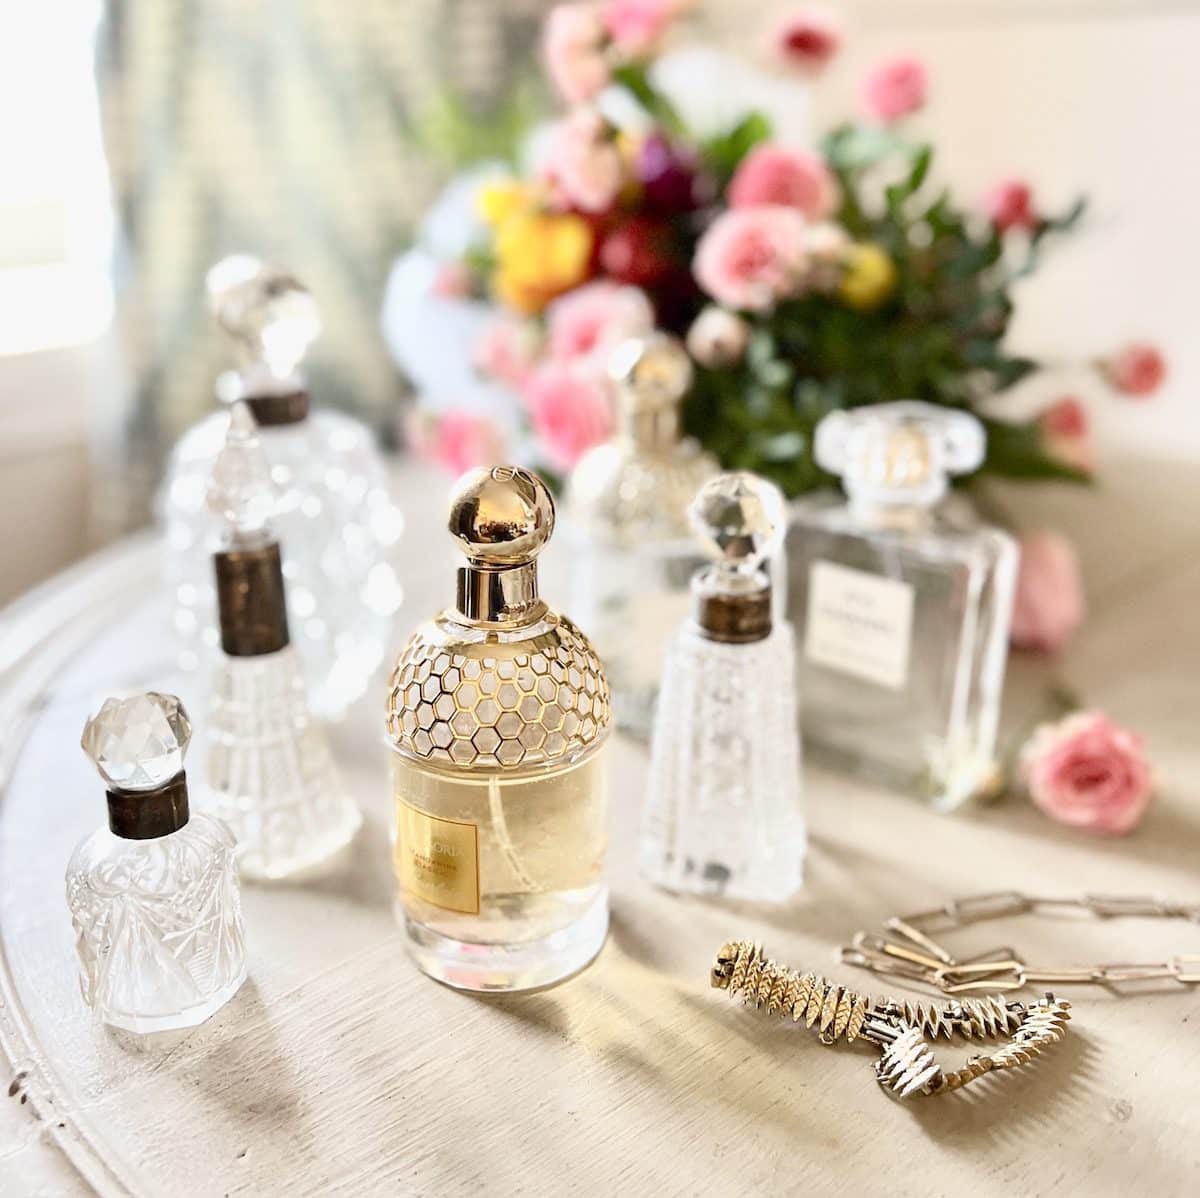 What Do Floral Fragrances Actually Smell Like? - Escentual's Blog